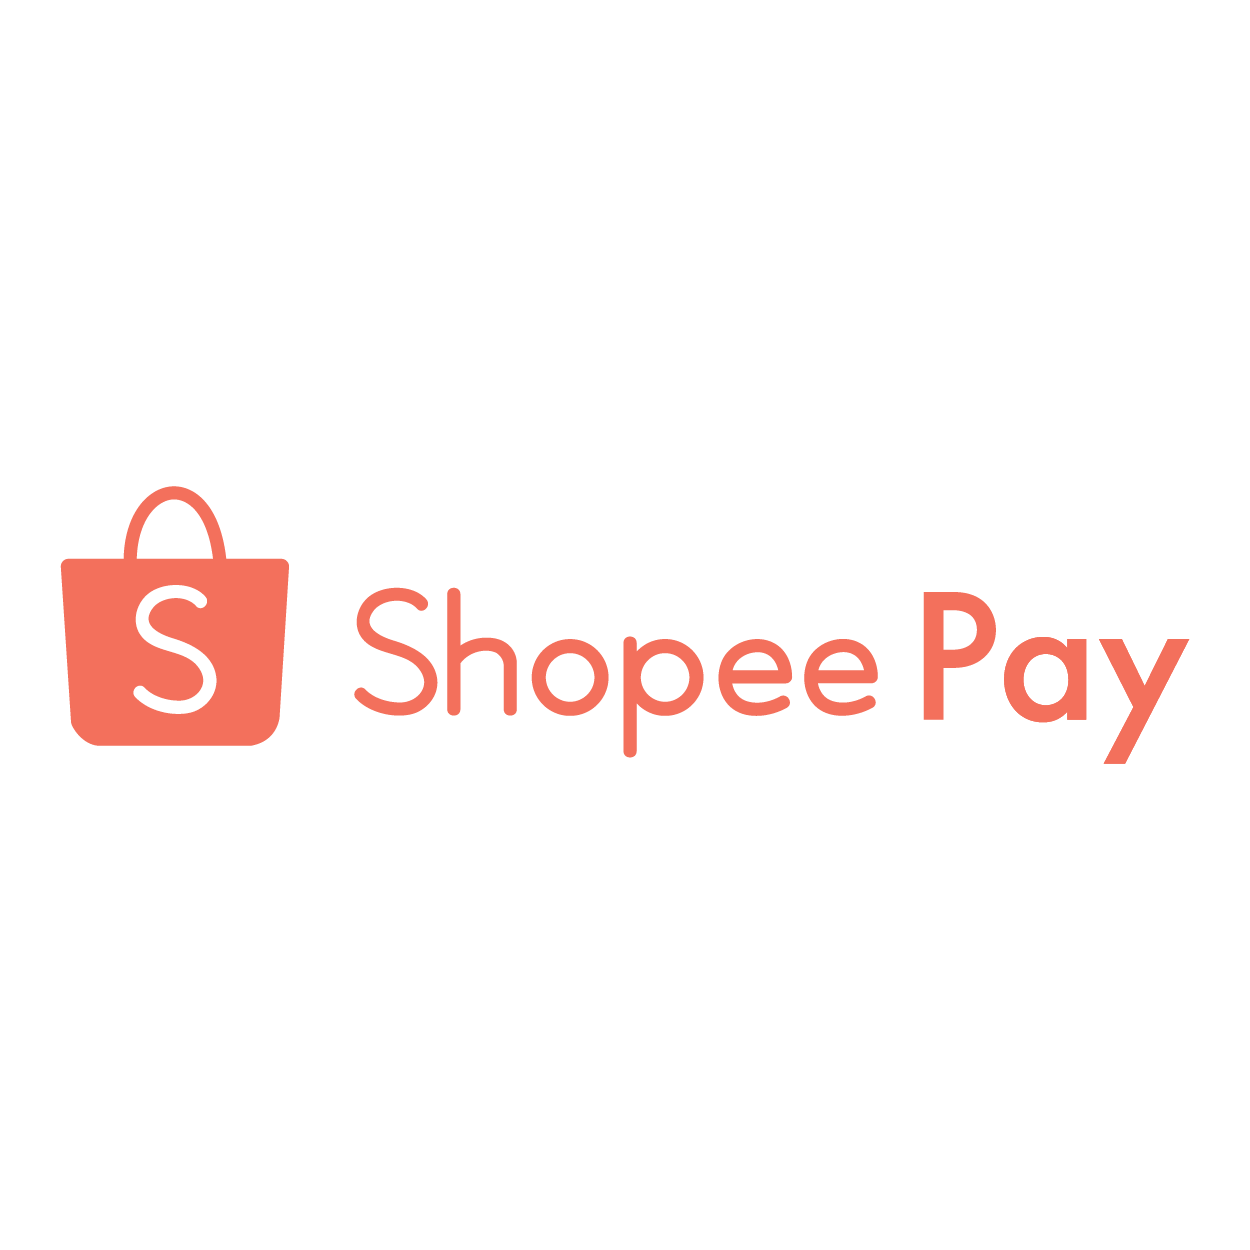 Safe and convenient mobile payments with Shopee Pay.